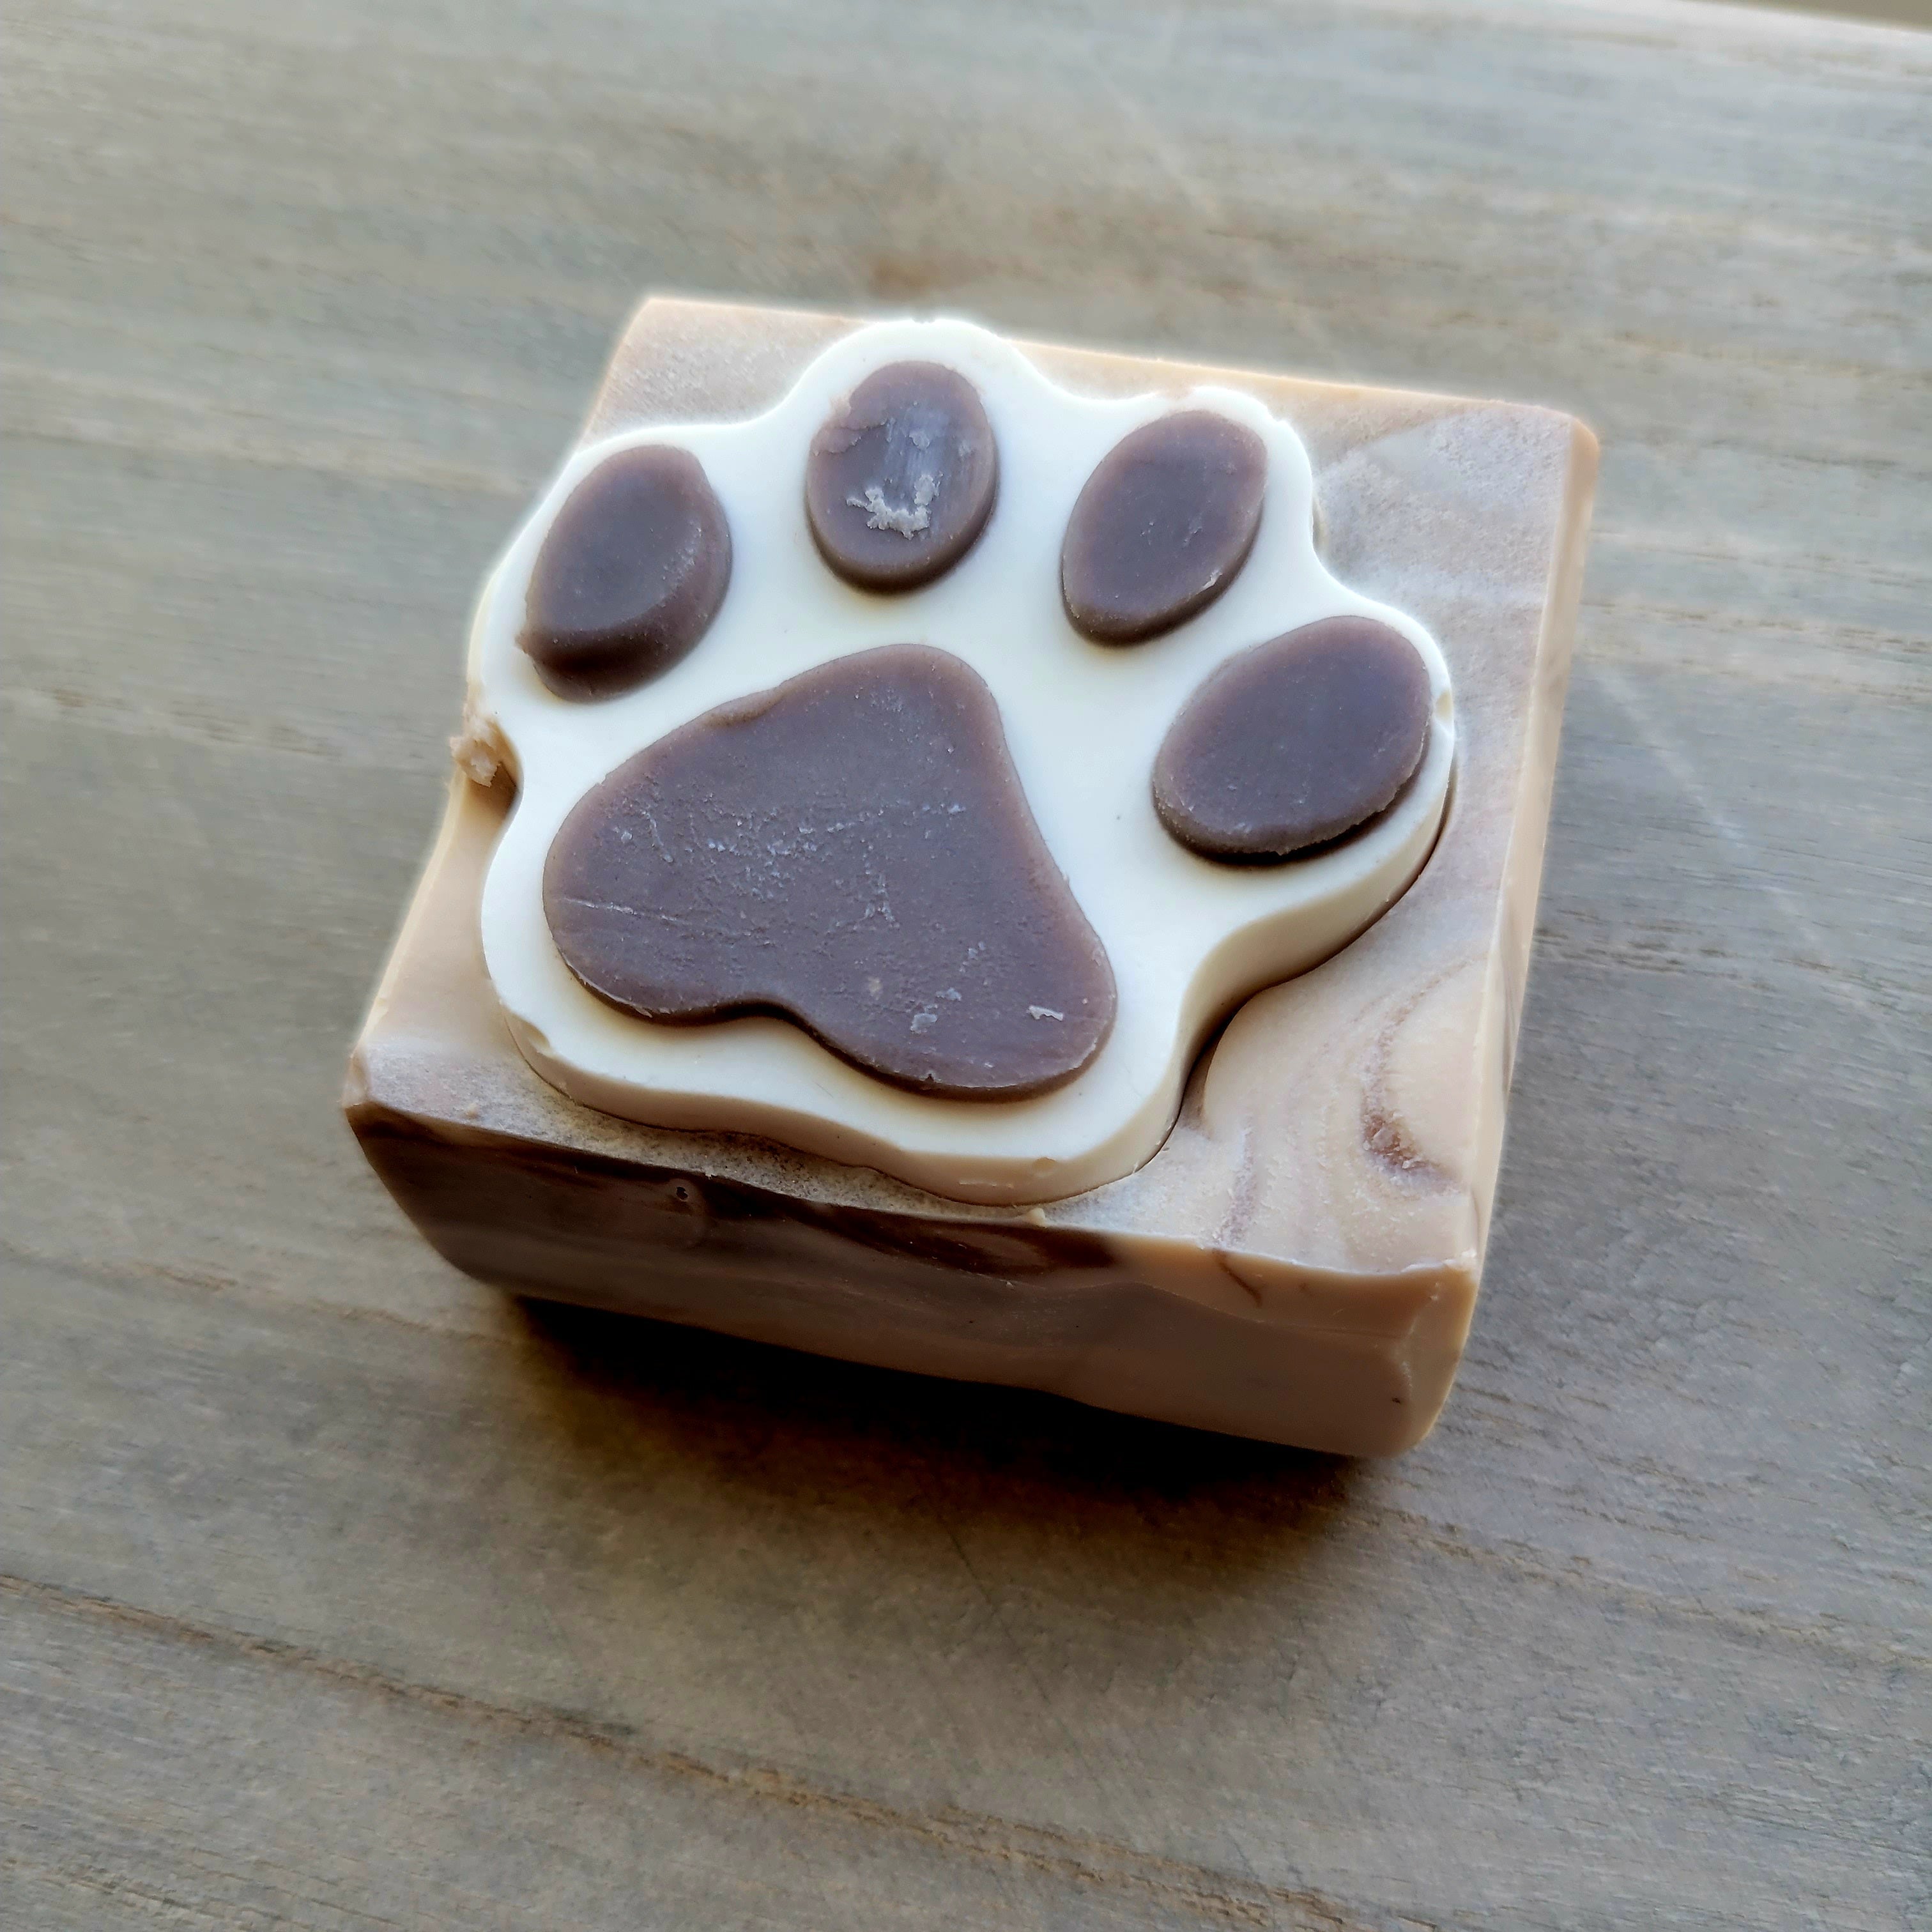 Unique Cat Themed Gifts, Handmade Paw Print Soap For humans